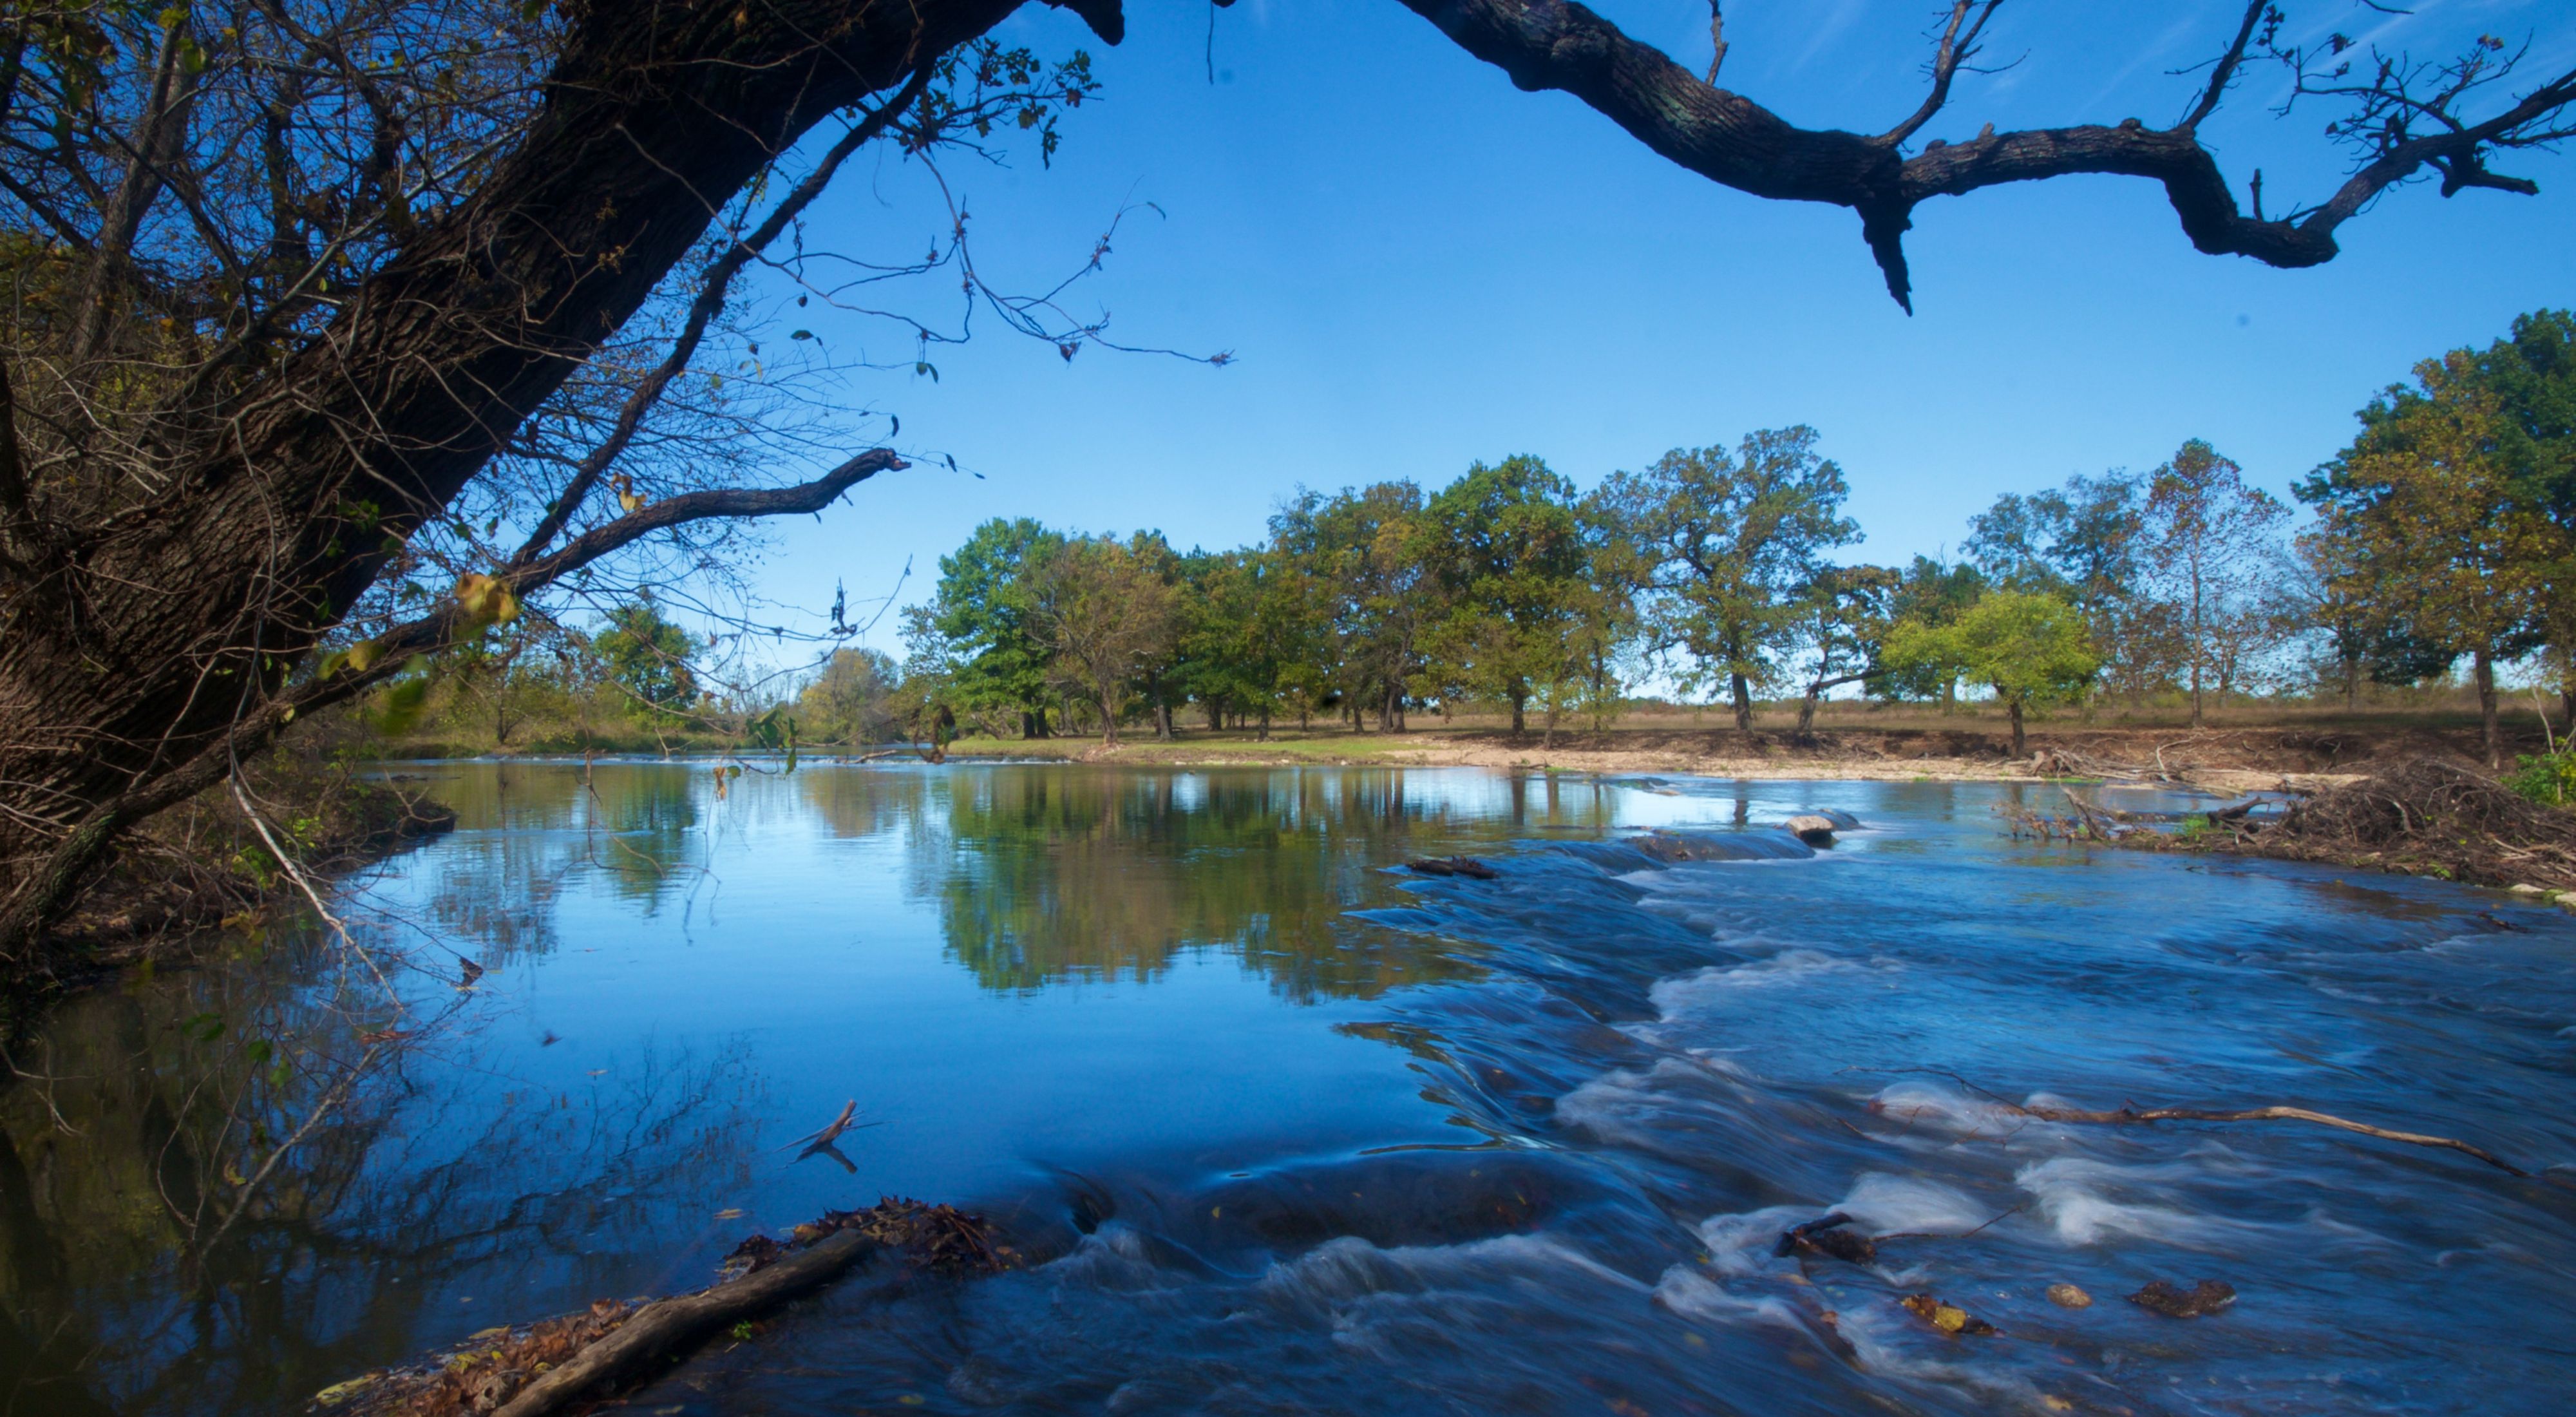 Oka’ Yanahli [oh-kuh yuh-naw-lee] means “flowing water” in Chickasaw.